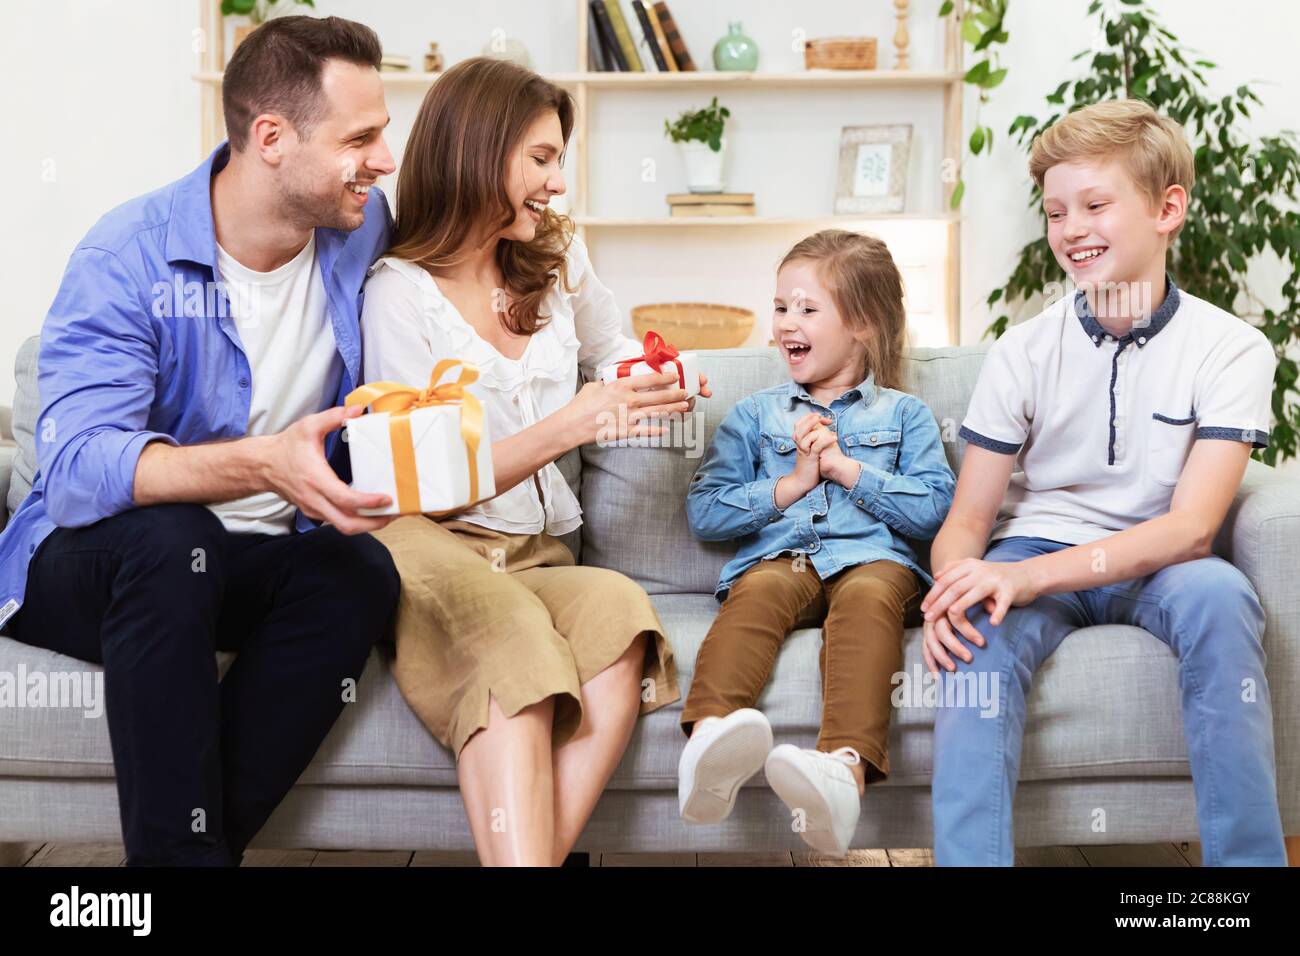 Parents Giving Gifts To Children Sitting On Sofa At Home Stock Photo